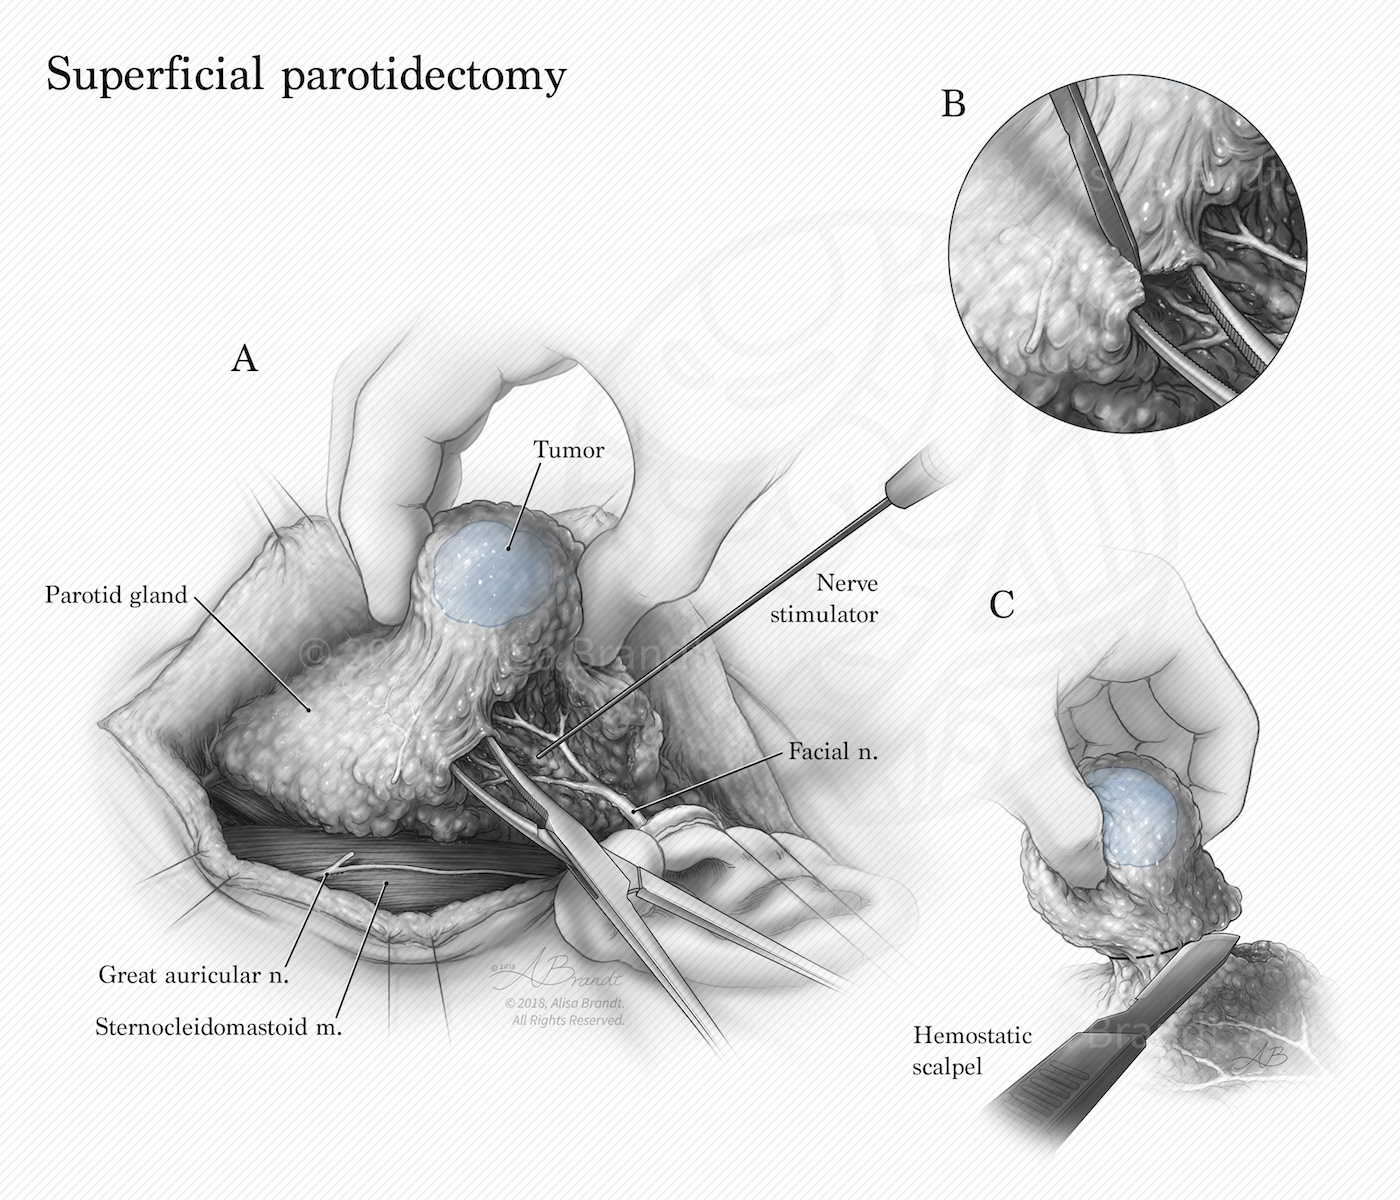 Superficial parotidectomy surgical illustration